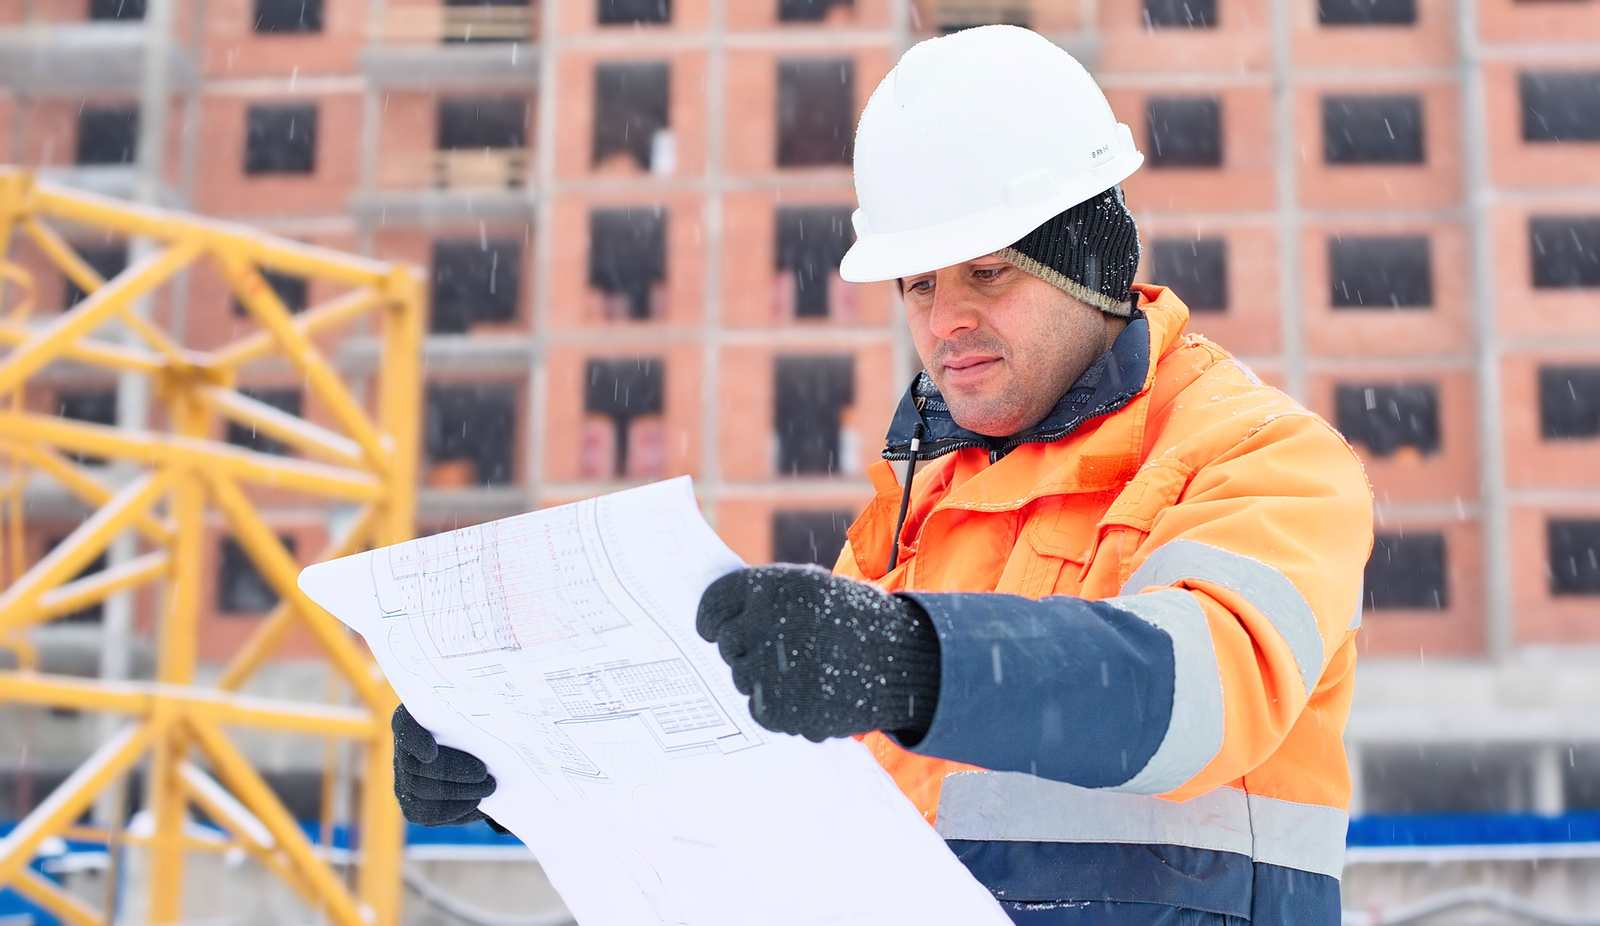 5 Tips for Contractors: How to Stay Warm in Cold Weather